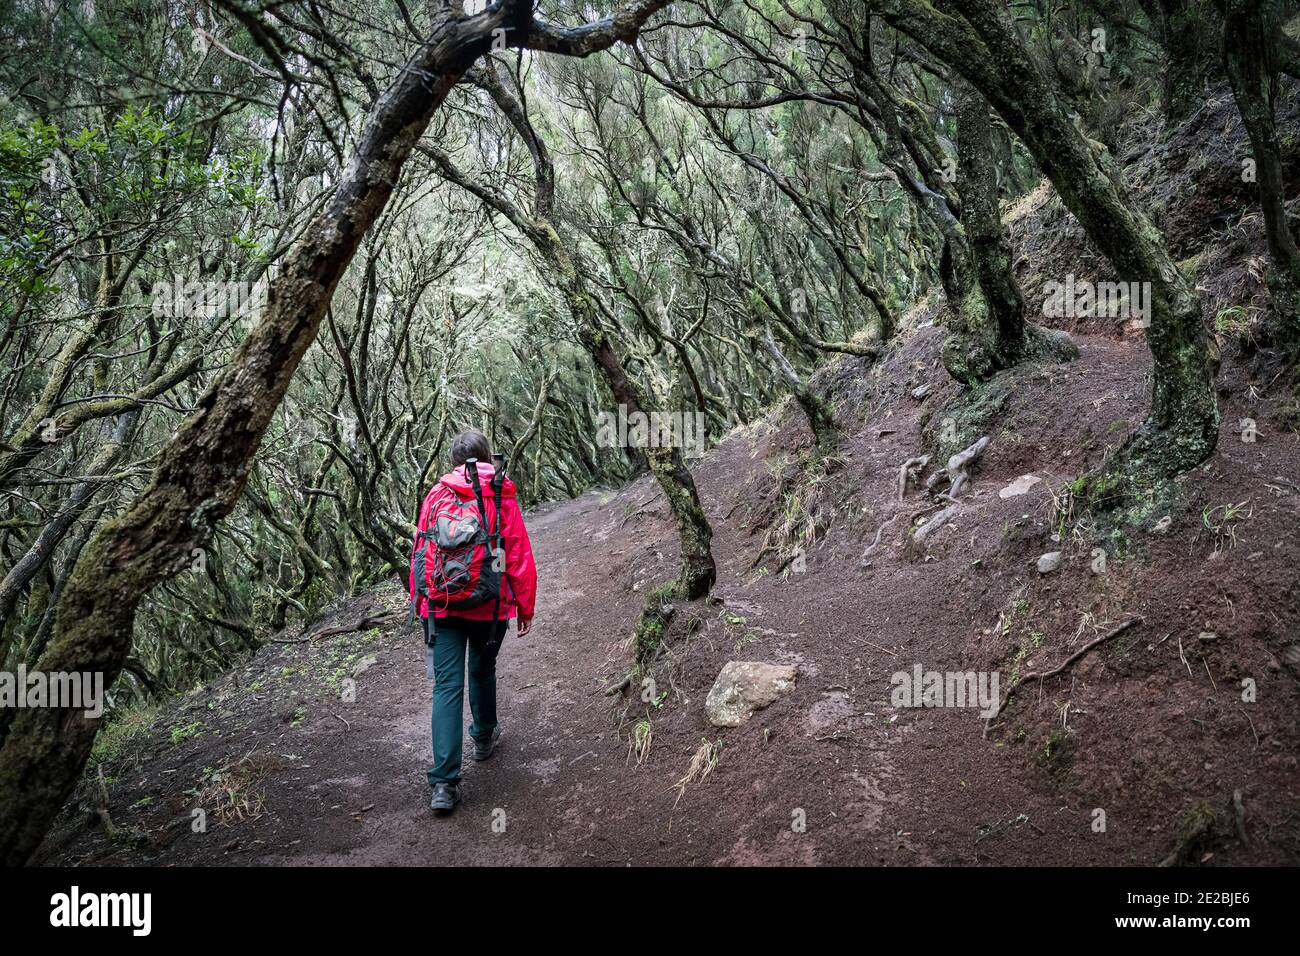 Female tourist walking in laurel forest / laurisilva / laurissilva at Macizo de Anaga on the island of Tenerife in the Canary Islands, Spain Stock Photo